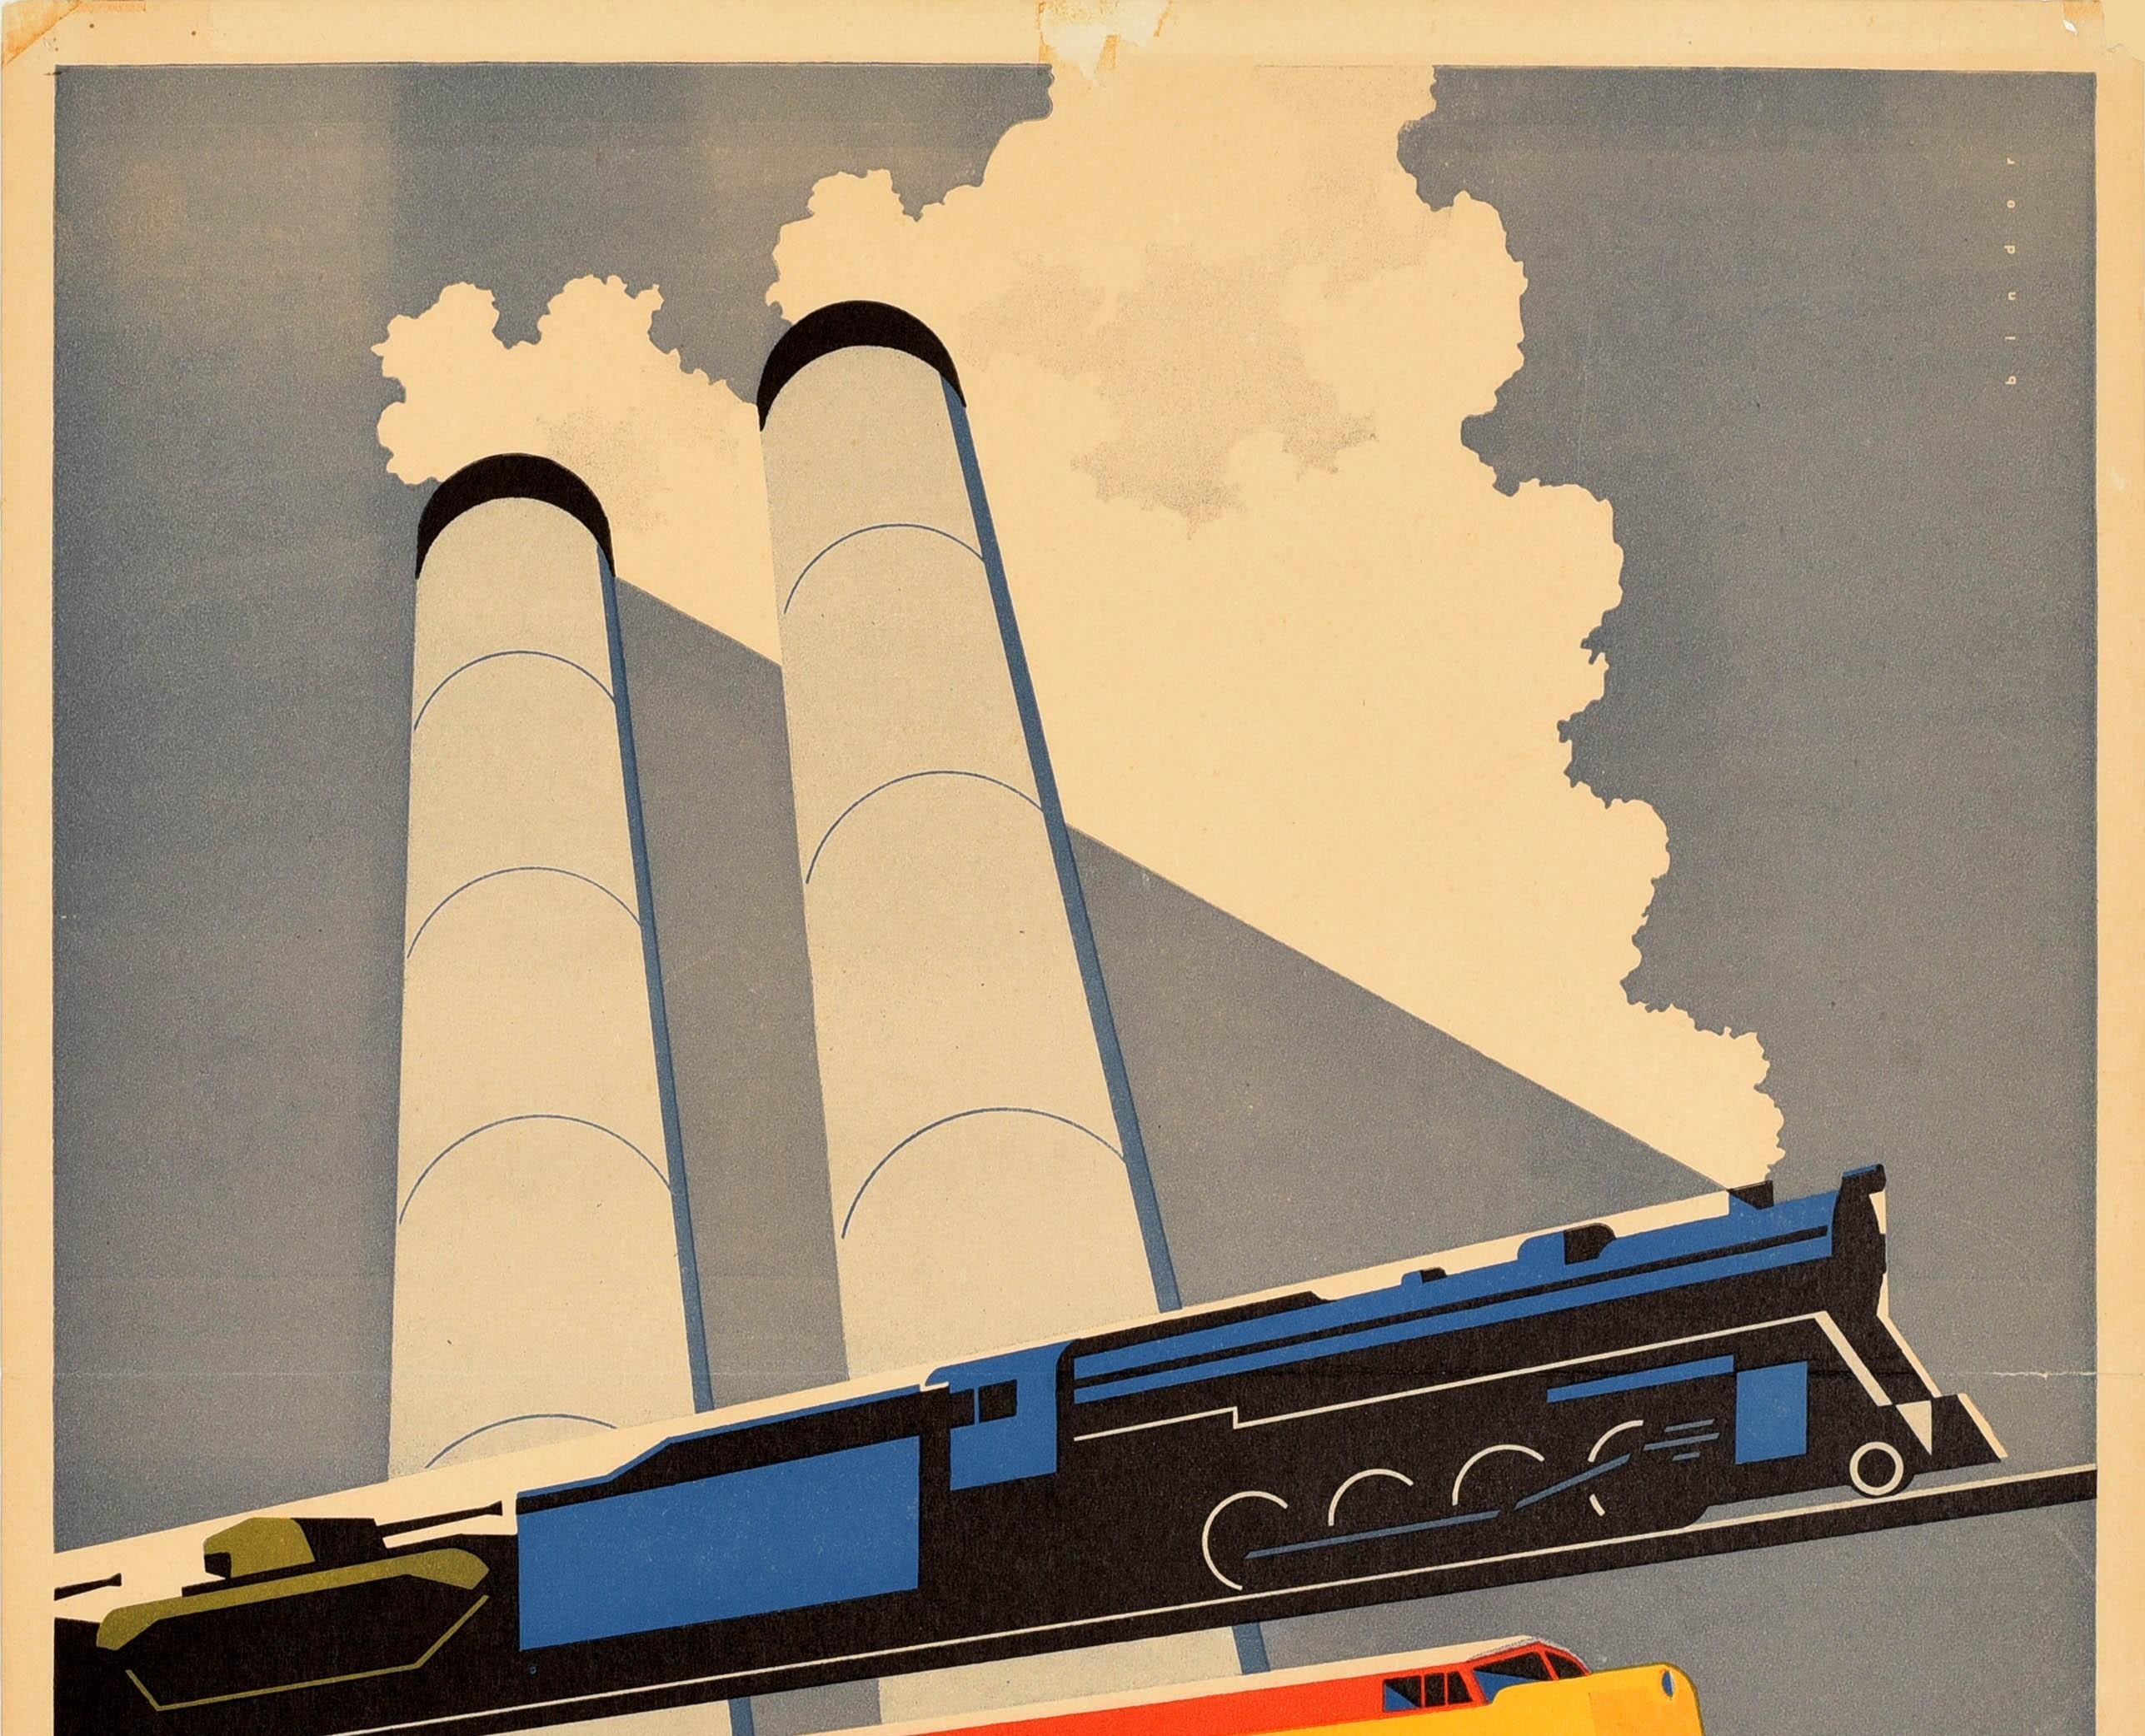 Original vintage propaganda poster issued by the Association of American Railroads Washington - Essential to Industry Vital to Defense - featuring a great design by Joseph Binder (1898-1972) of a steam train with a blue and black engine pulling